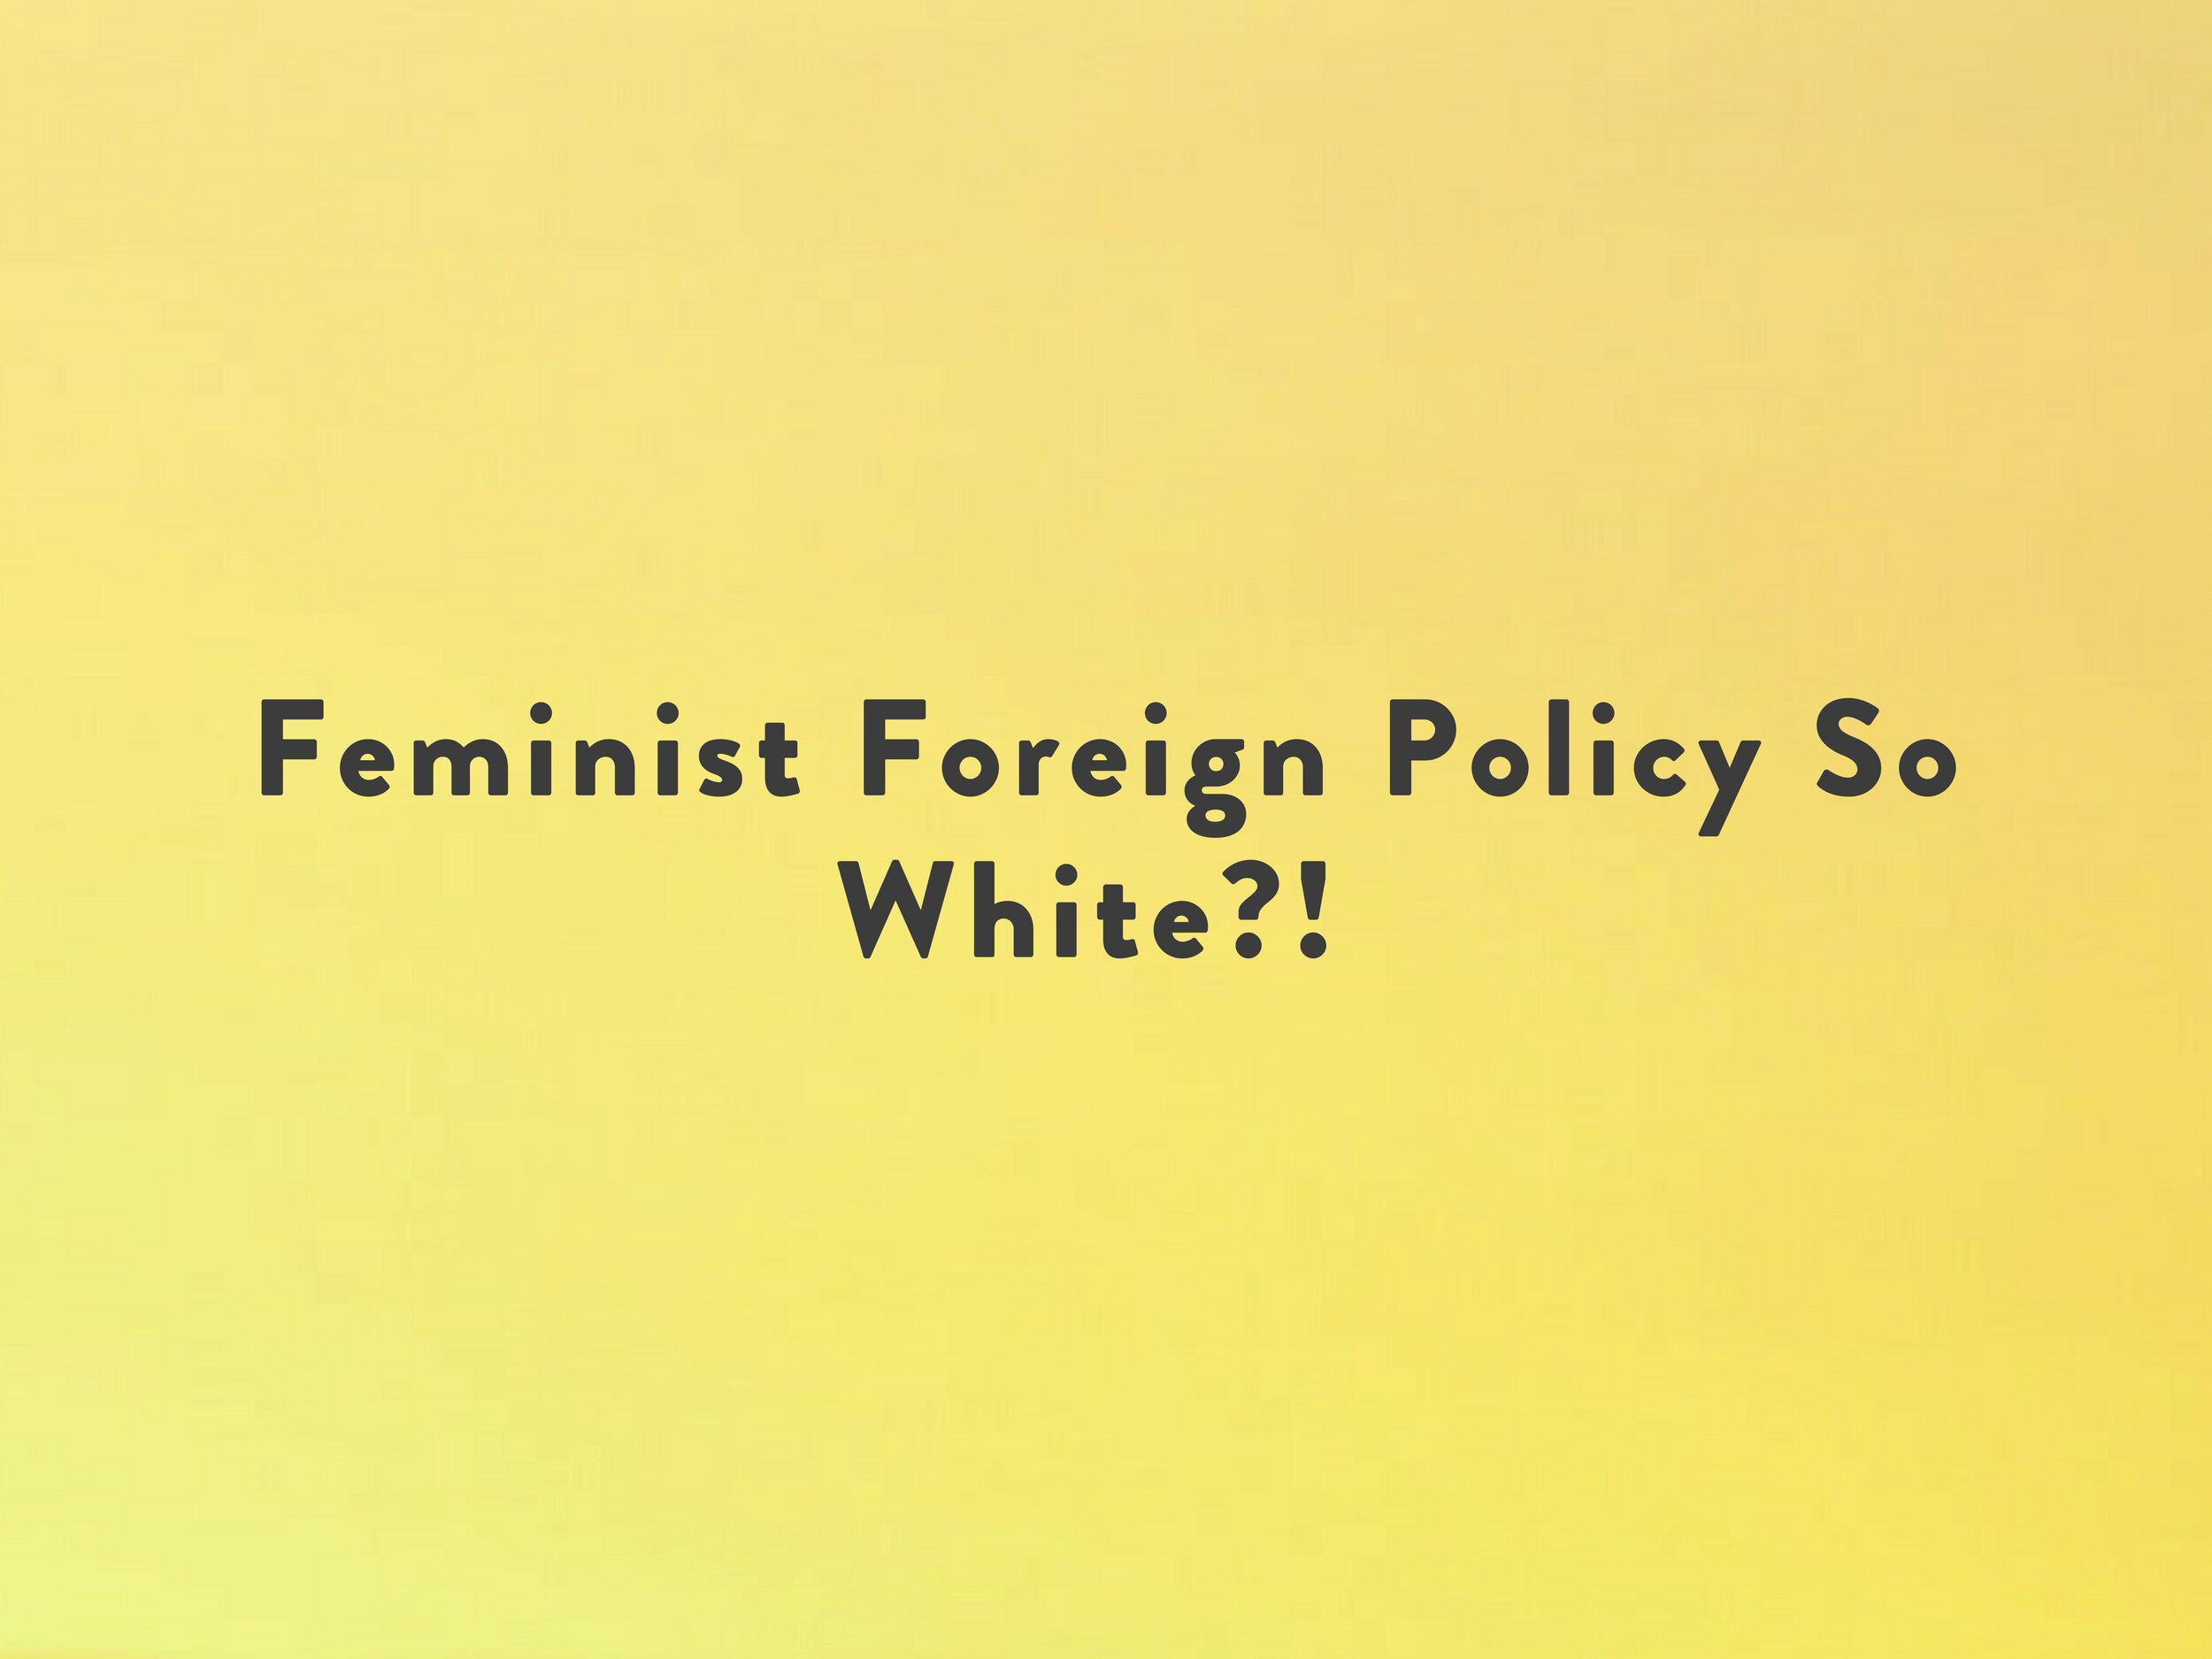 Feminist Foreign Policy So White?!